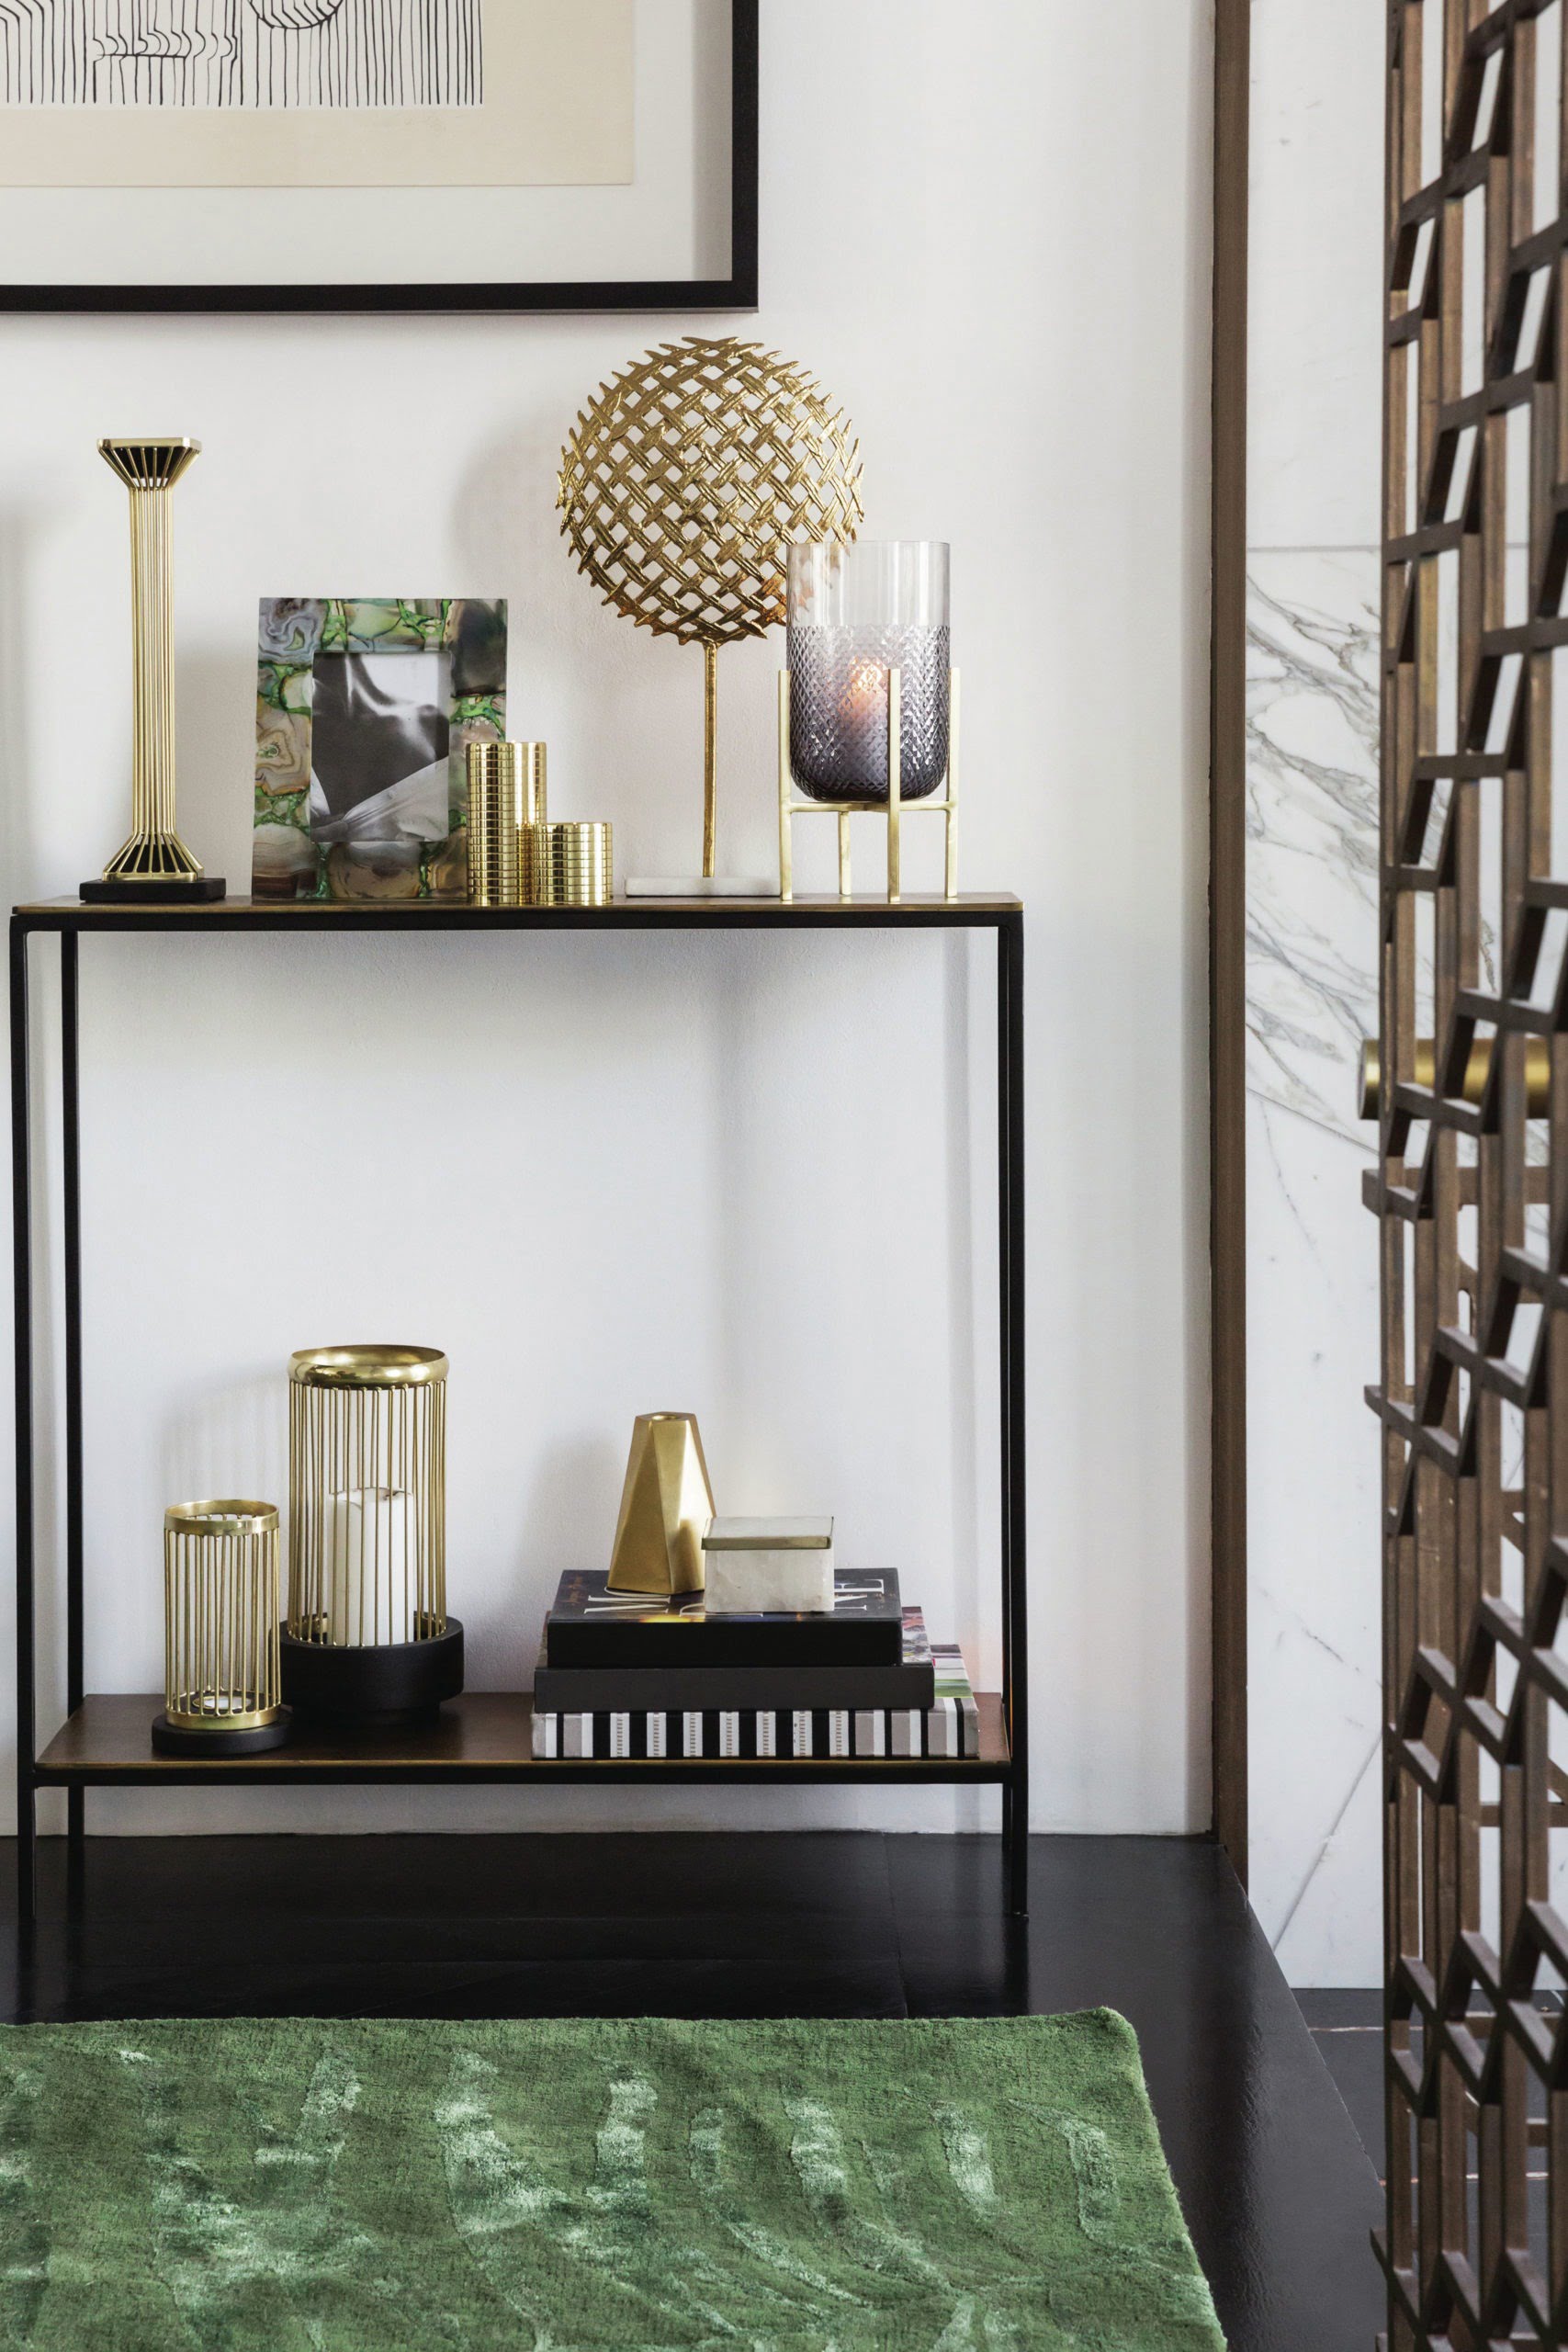 small shelving unit with gold accessories and candles

Tips and tricks on how to style your home so that you can create a space you'll love with tips from interior stylist Maxine Brady